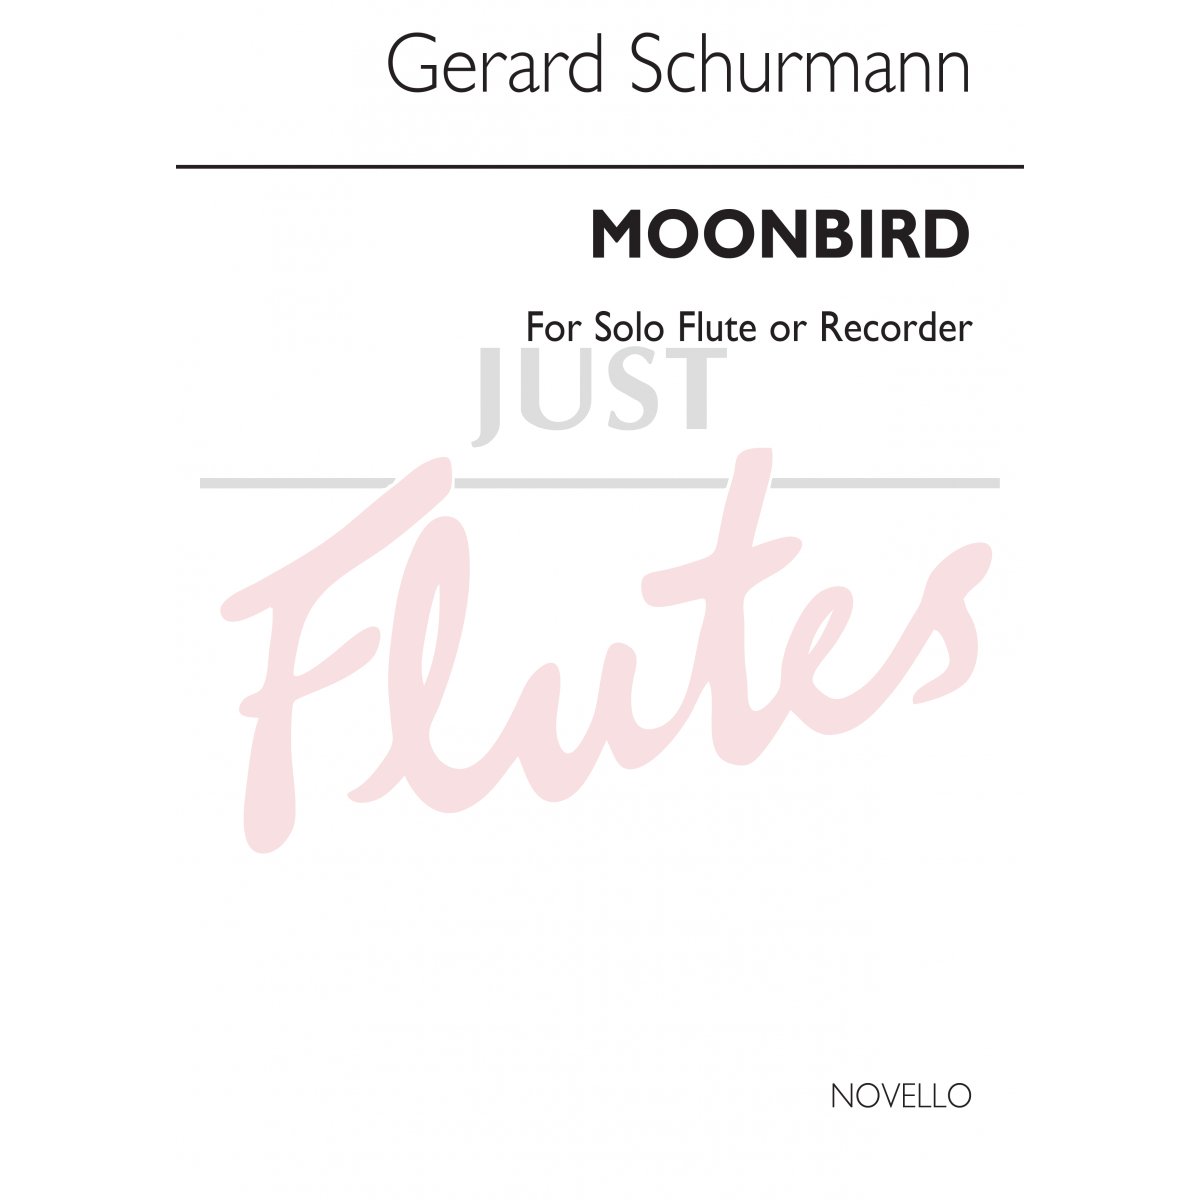 Moonbird for Solo Flute or Recorder